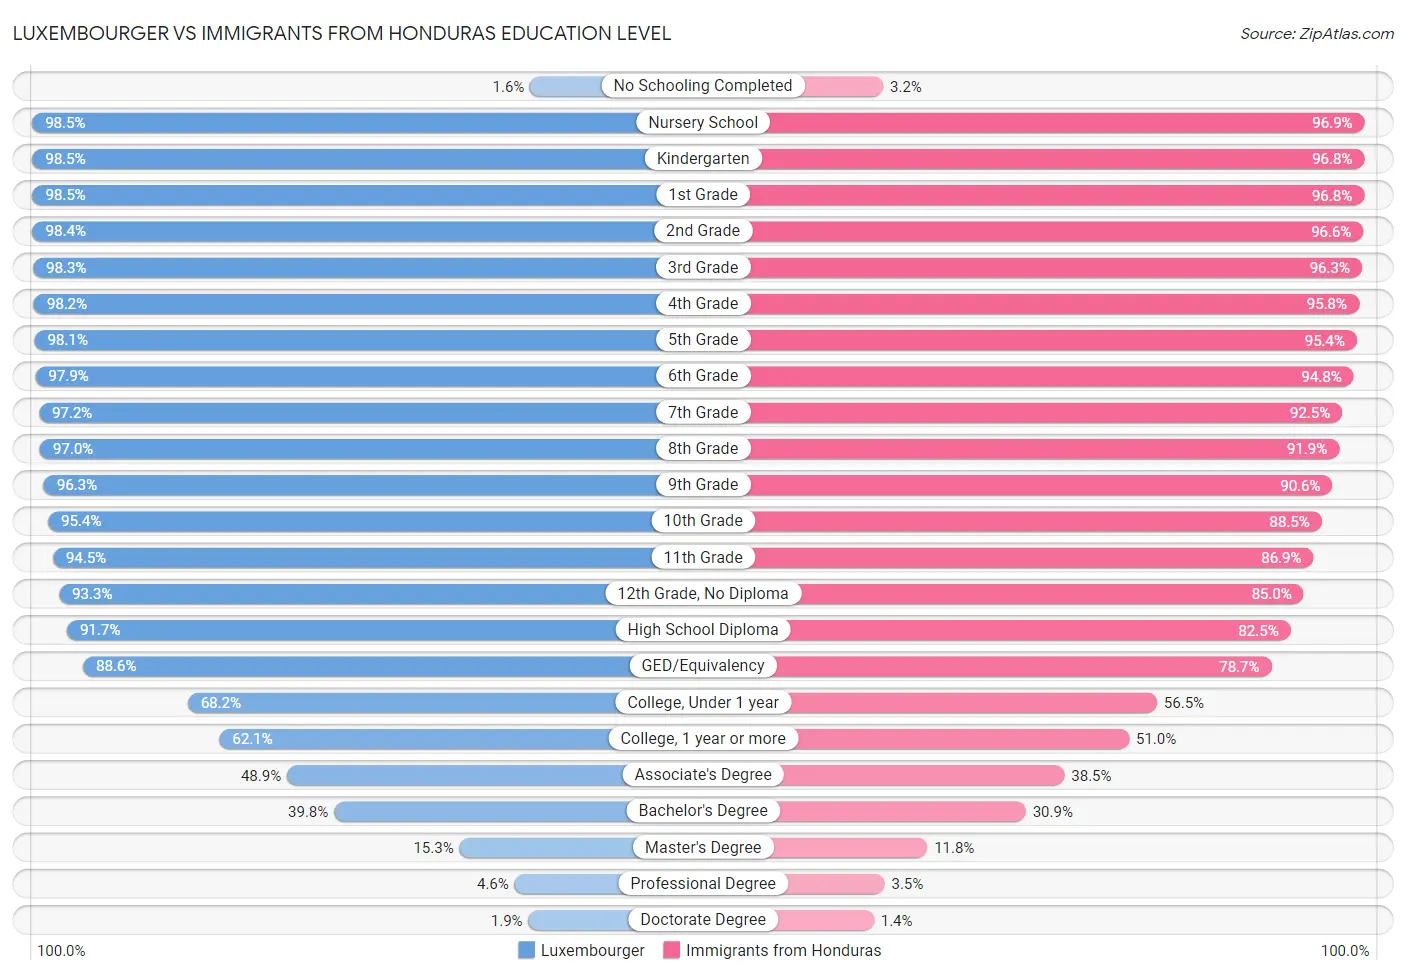 Luxembourger vs Immigrants from Honduras Education Level